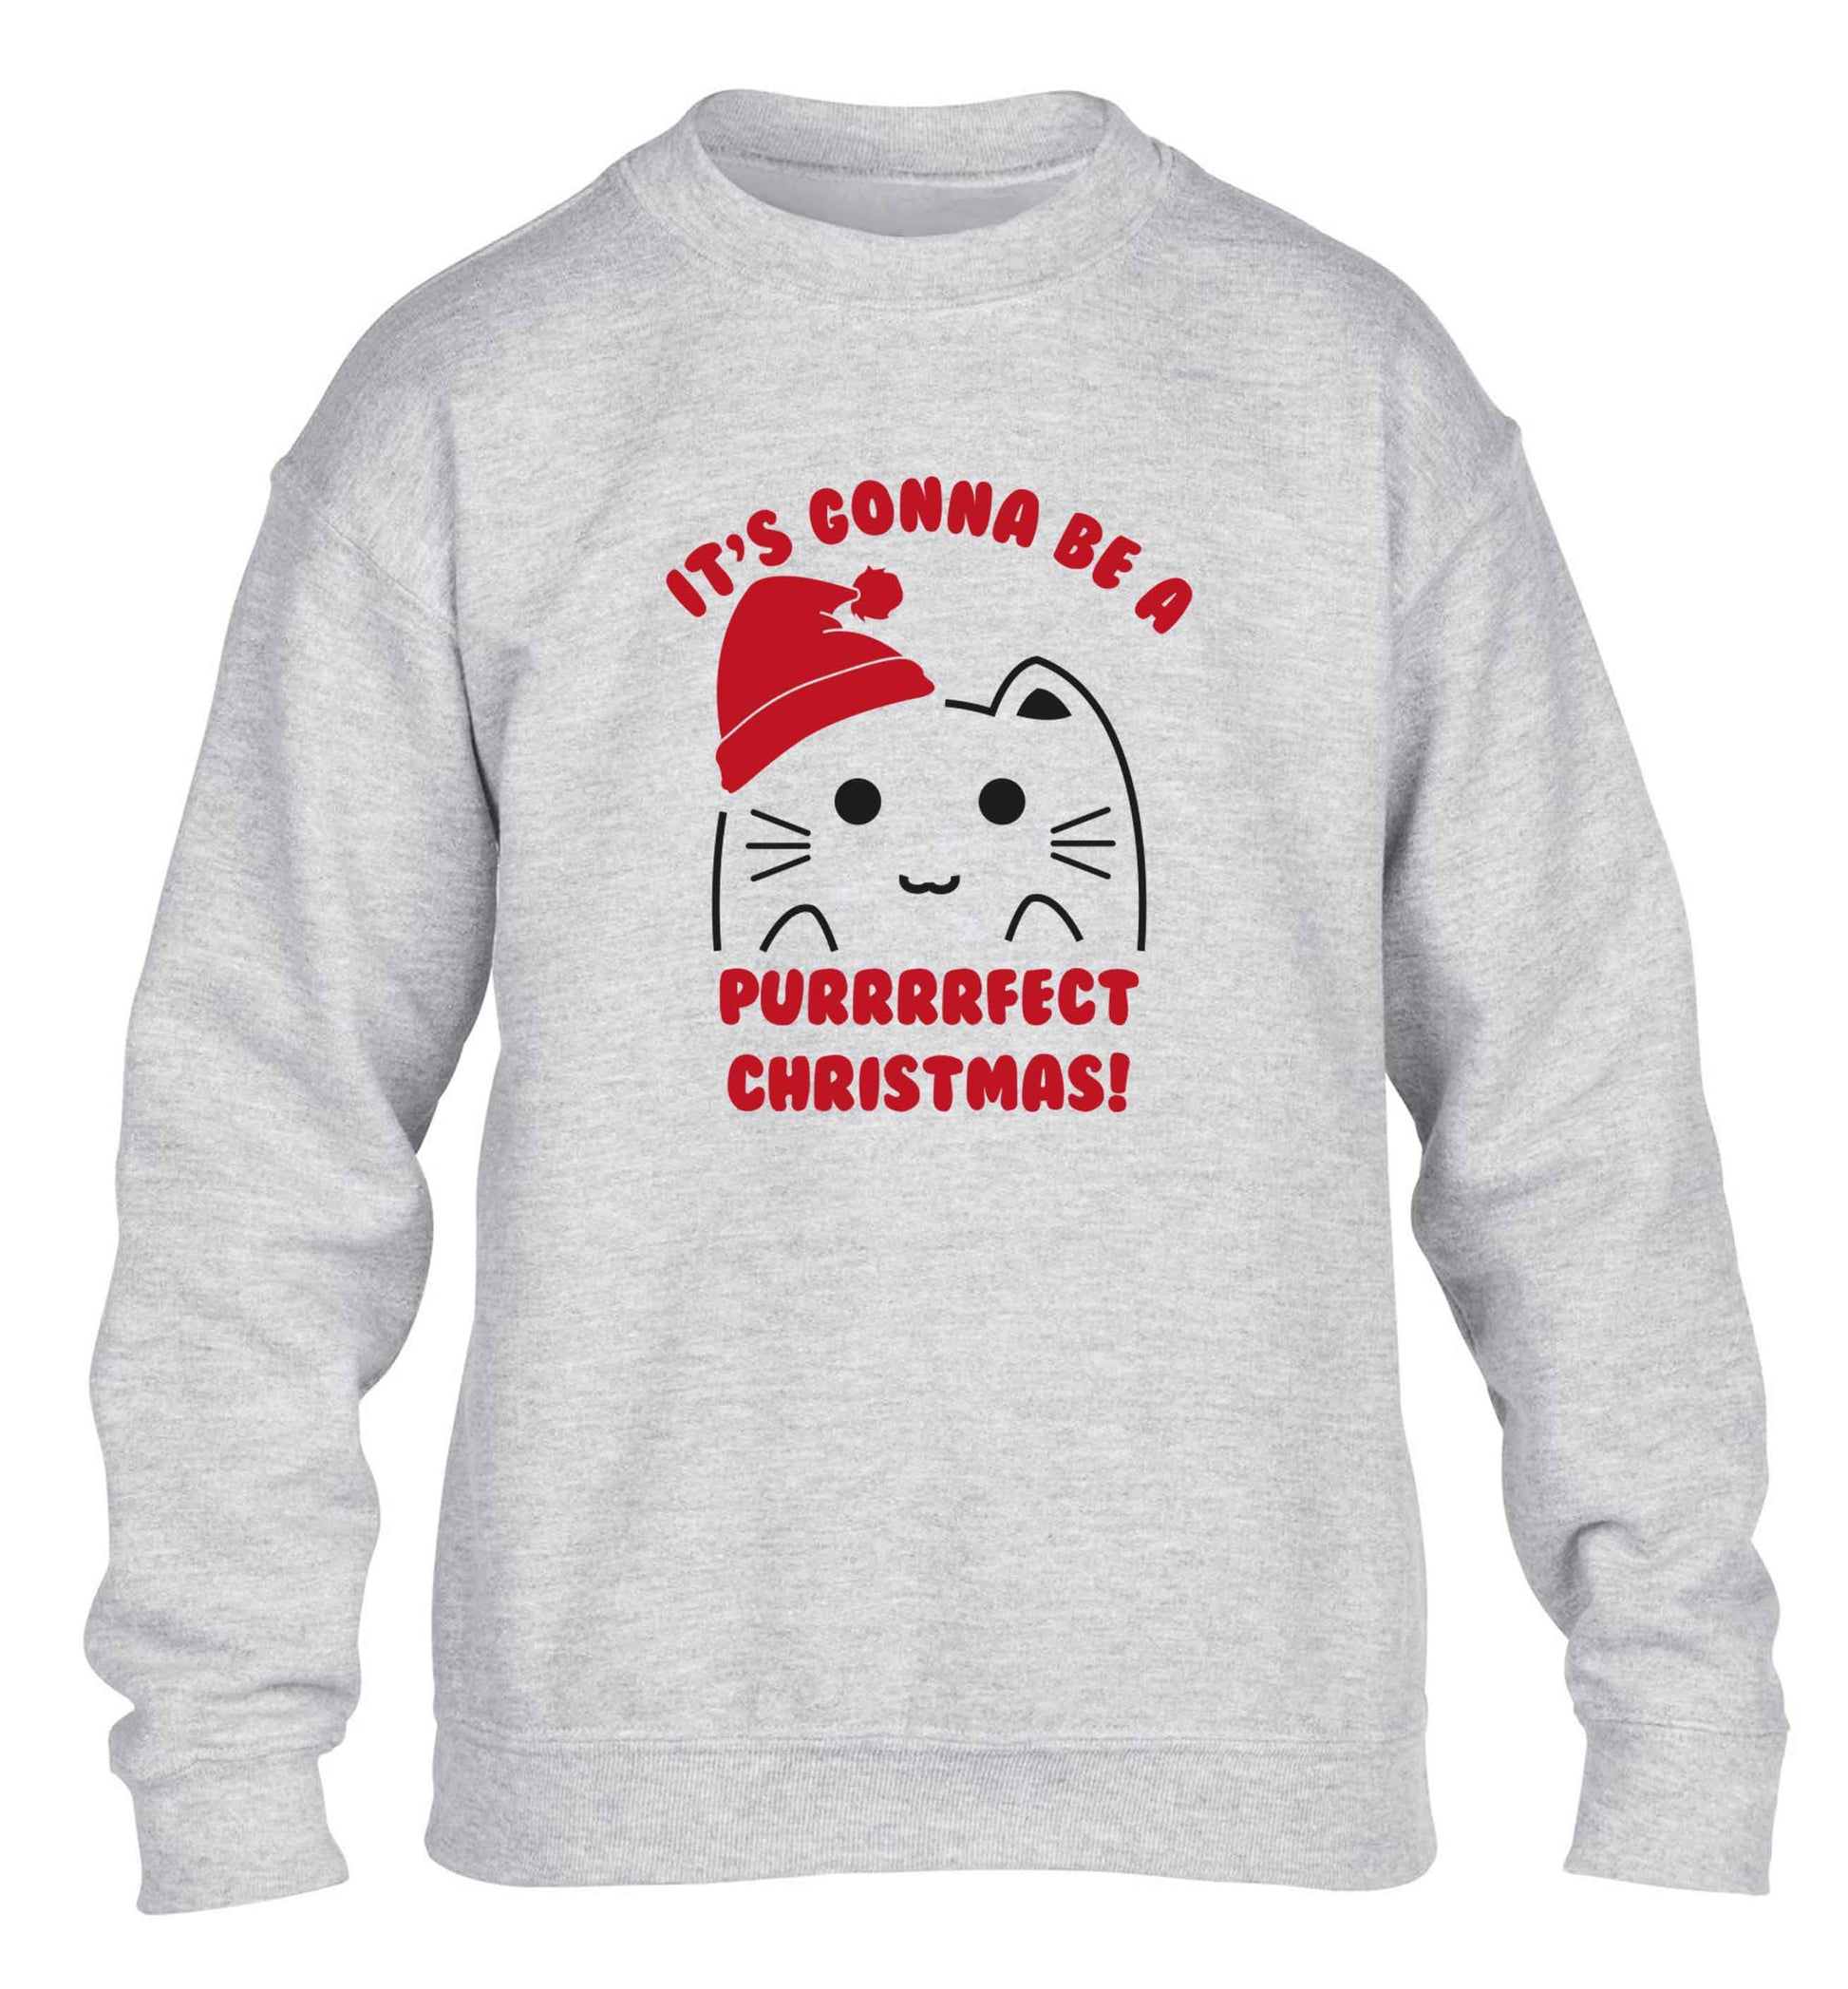 It's going to be a purrfect Christmas children's grey sweater 12-13 Years